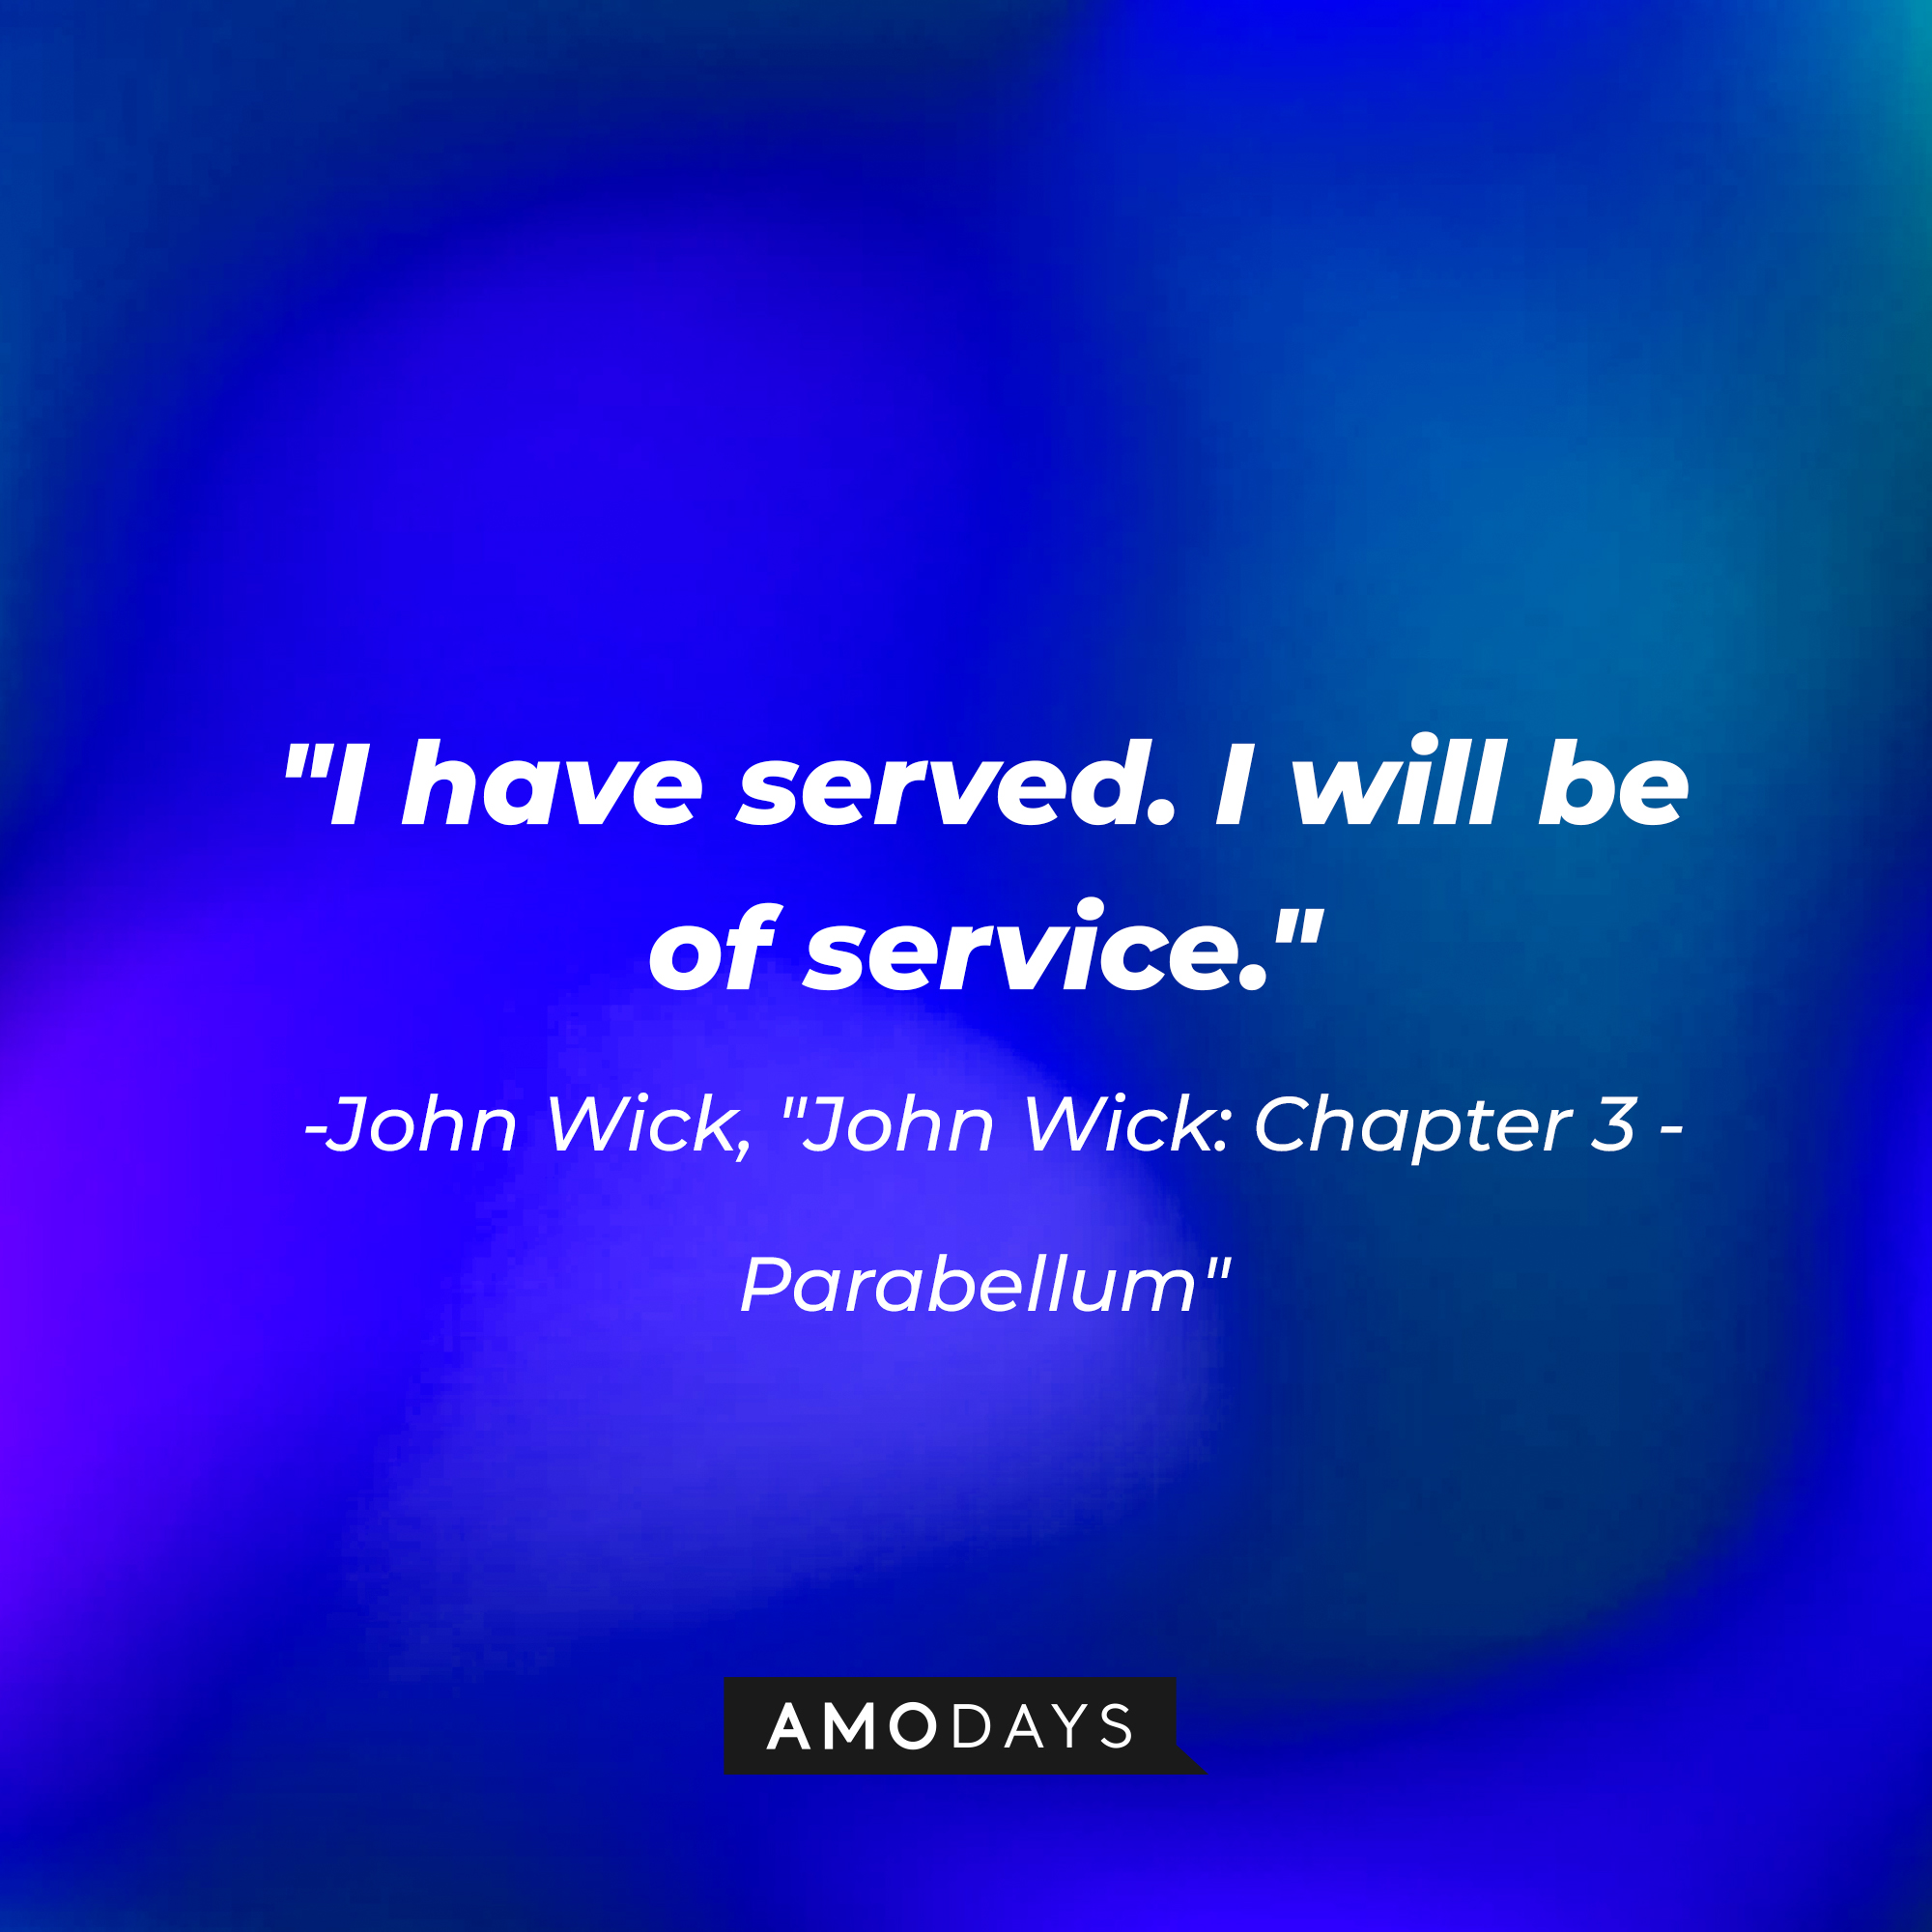 John Wick's quote: "I have served. I will be of service." | Source: AmoDays